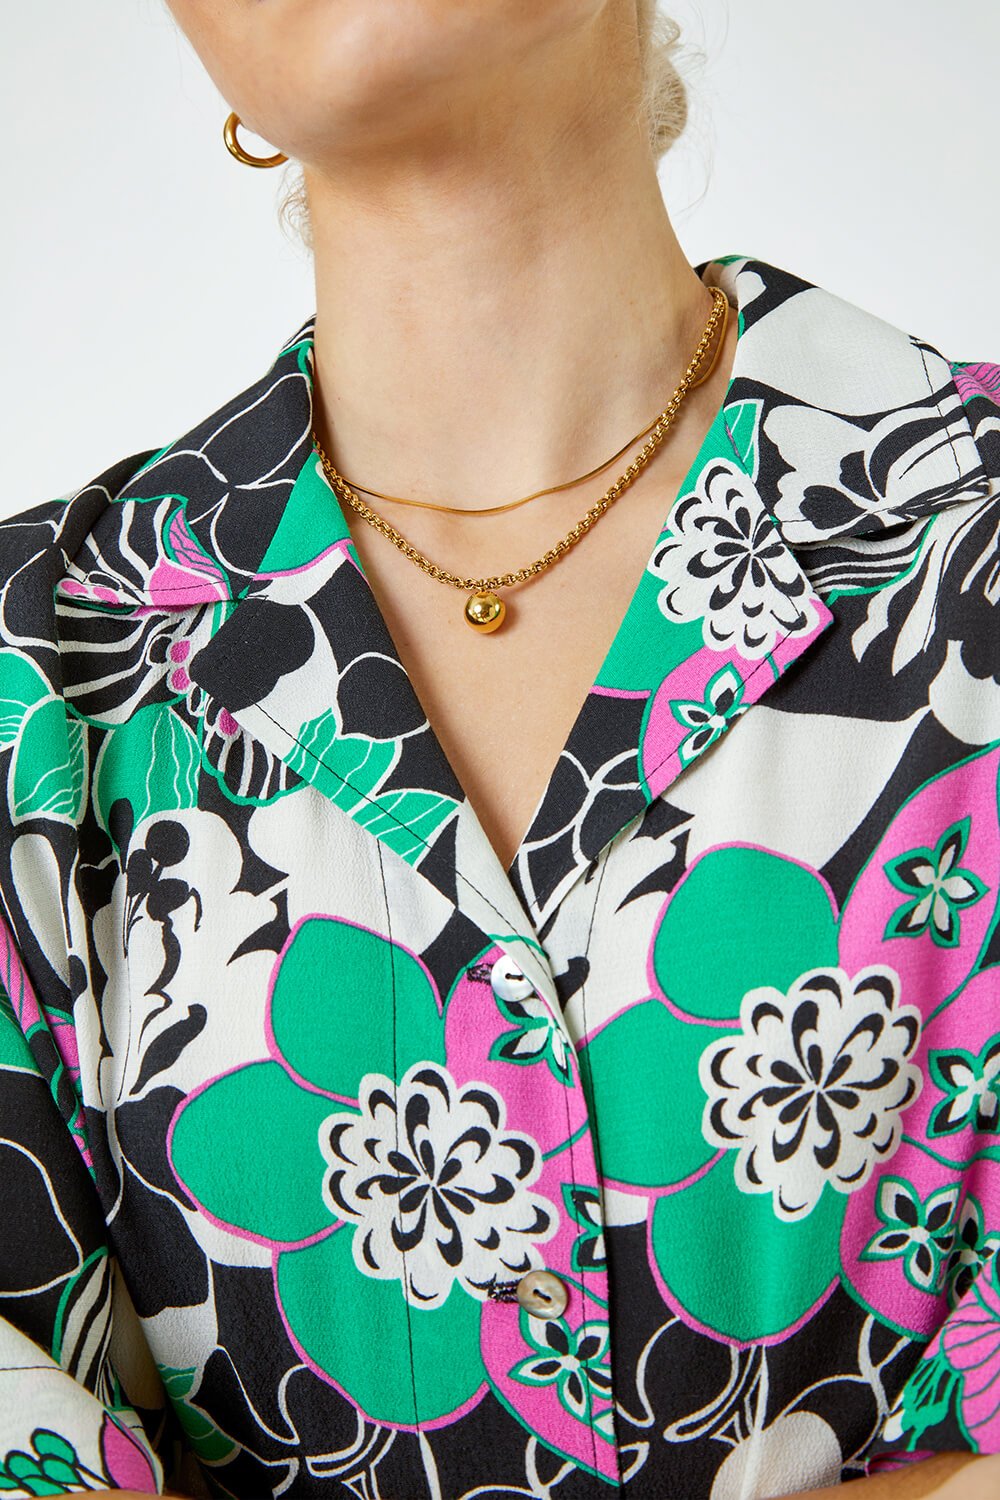 Black Relaxed Floral Print Shirt, Image 5 of 6